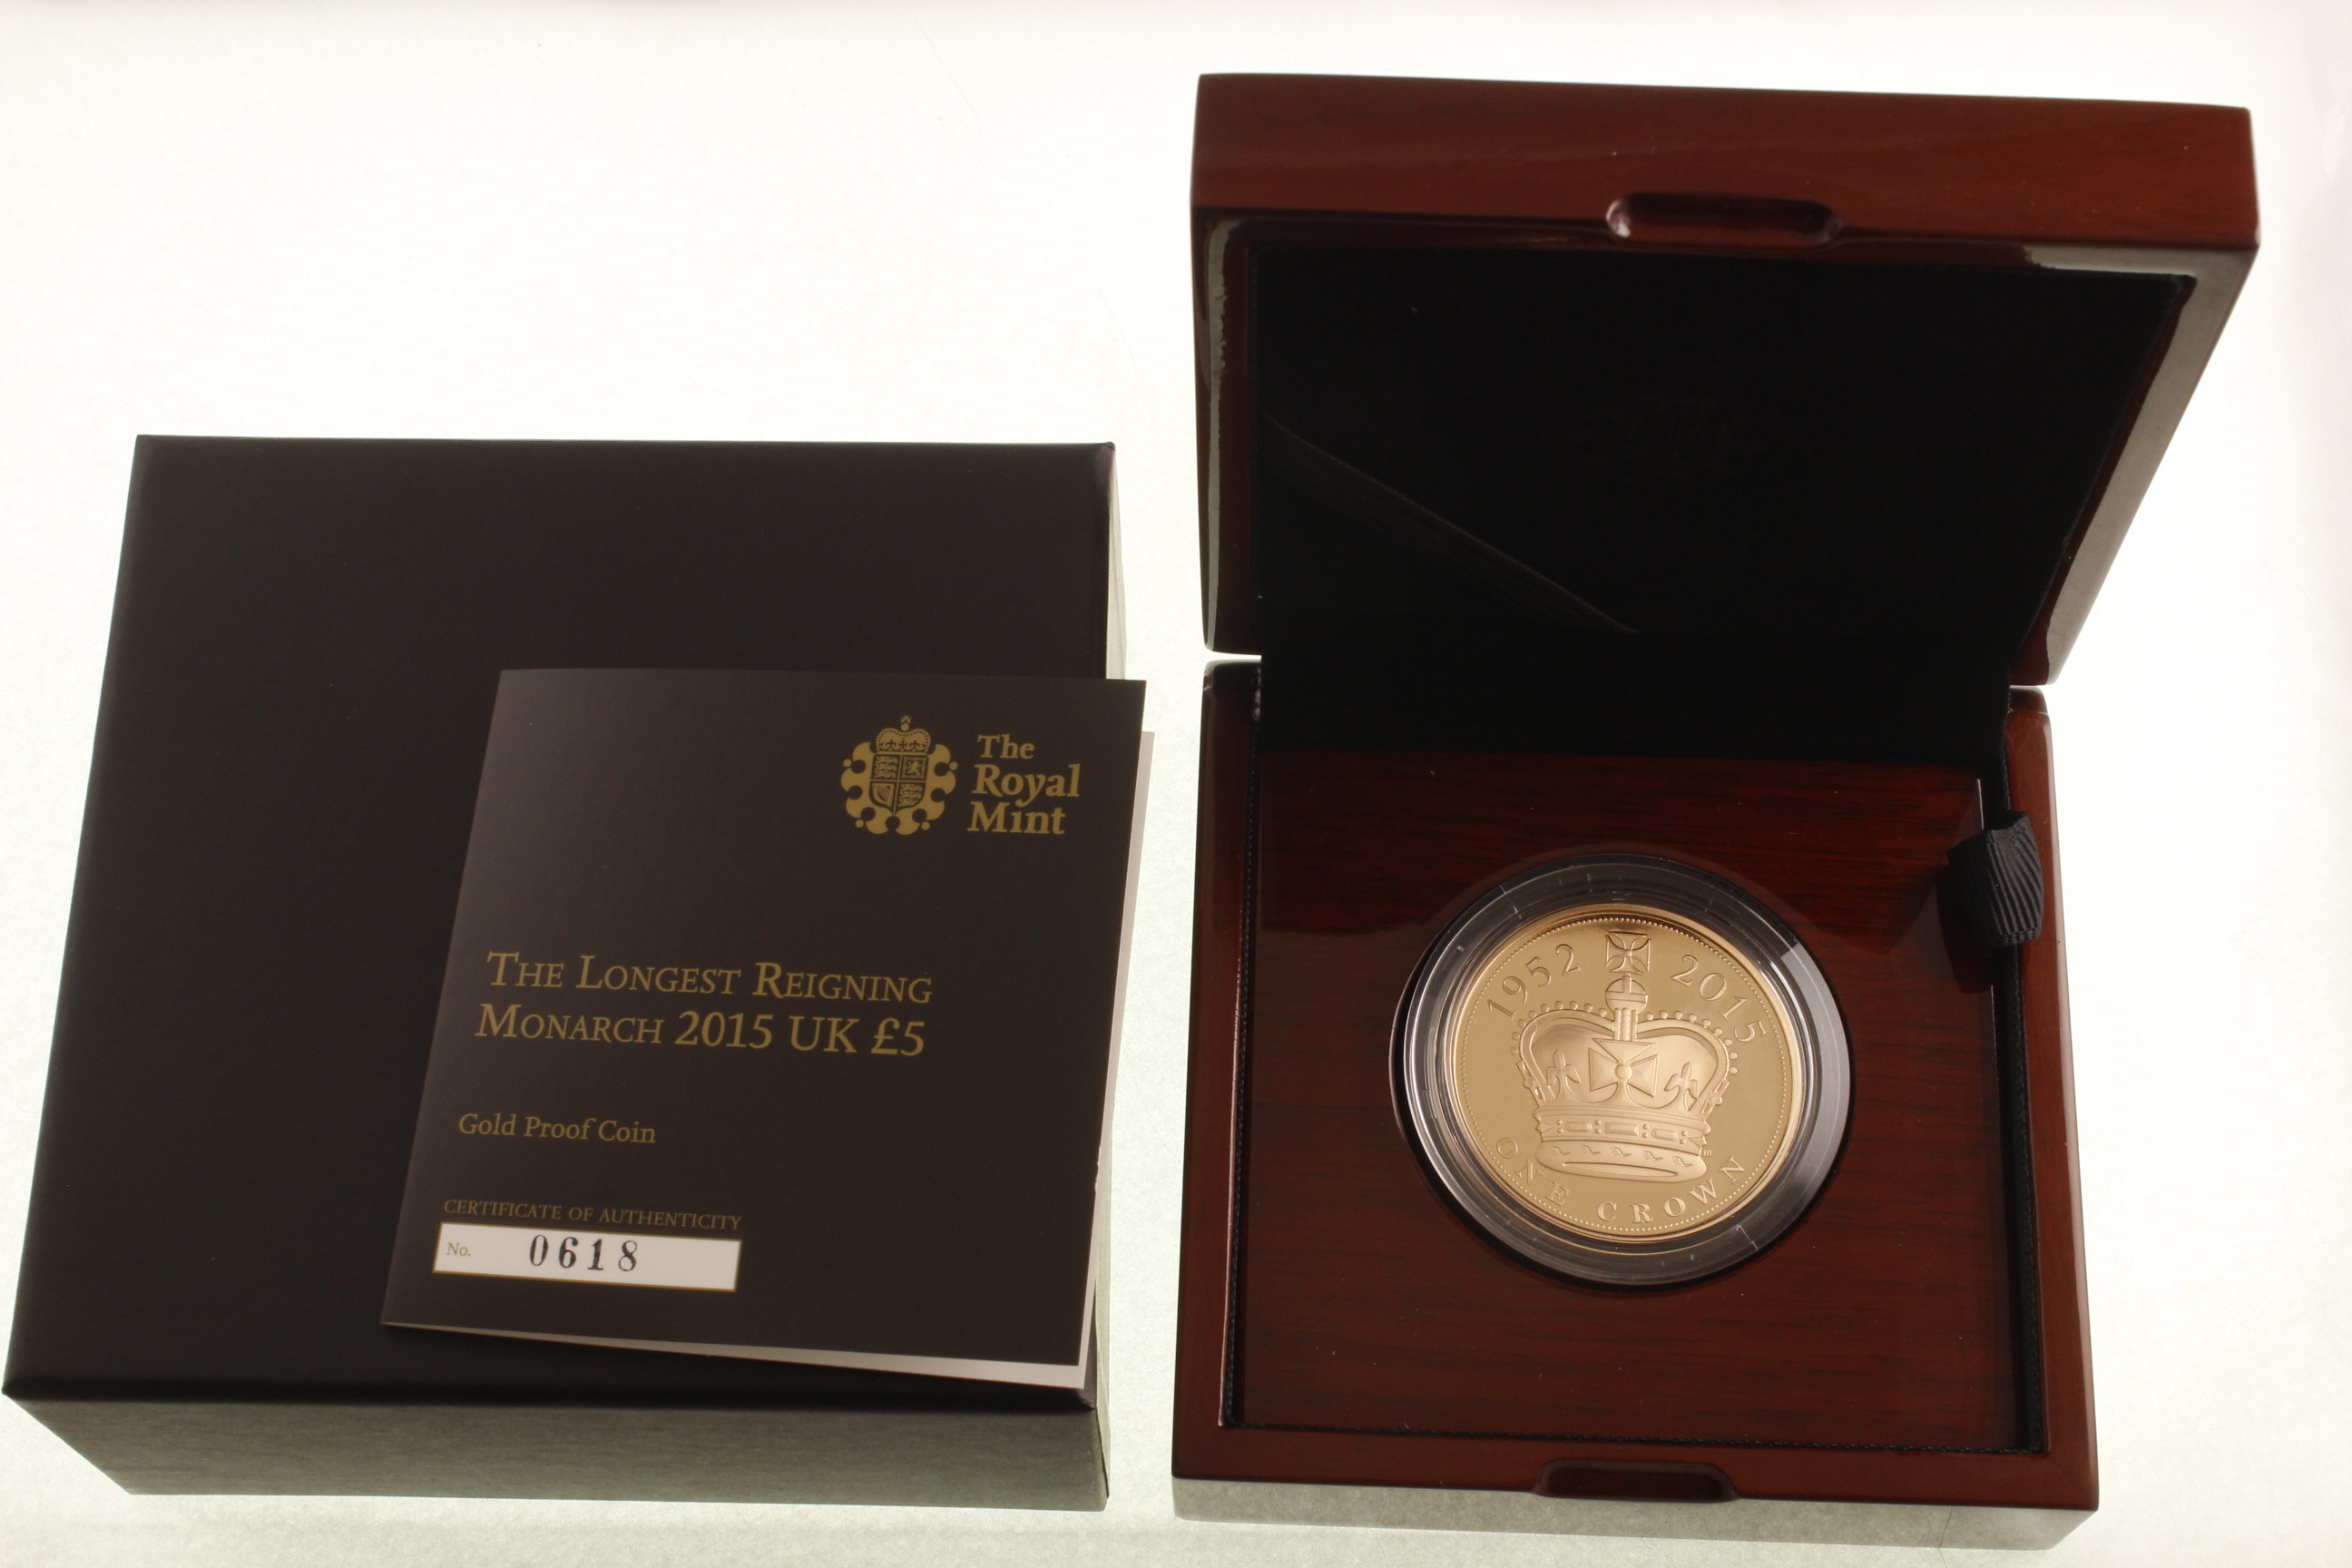 Royal Mint 2015 £5 gold proof coin "The longest reigning monarch" with box and certificate - Image 3 of 3